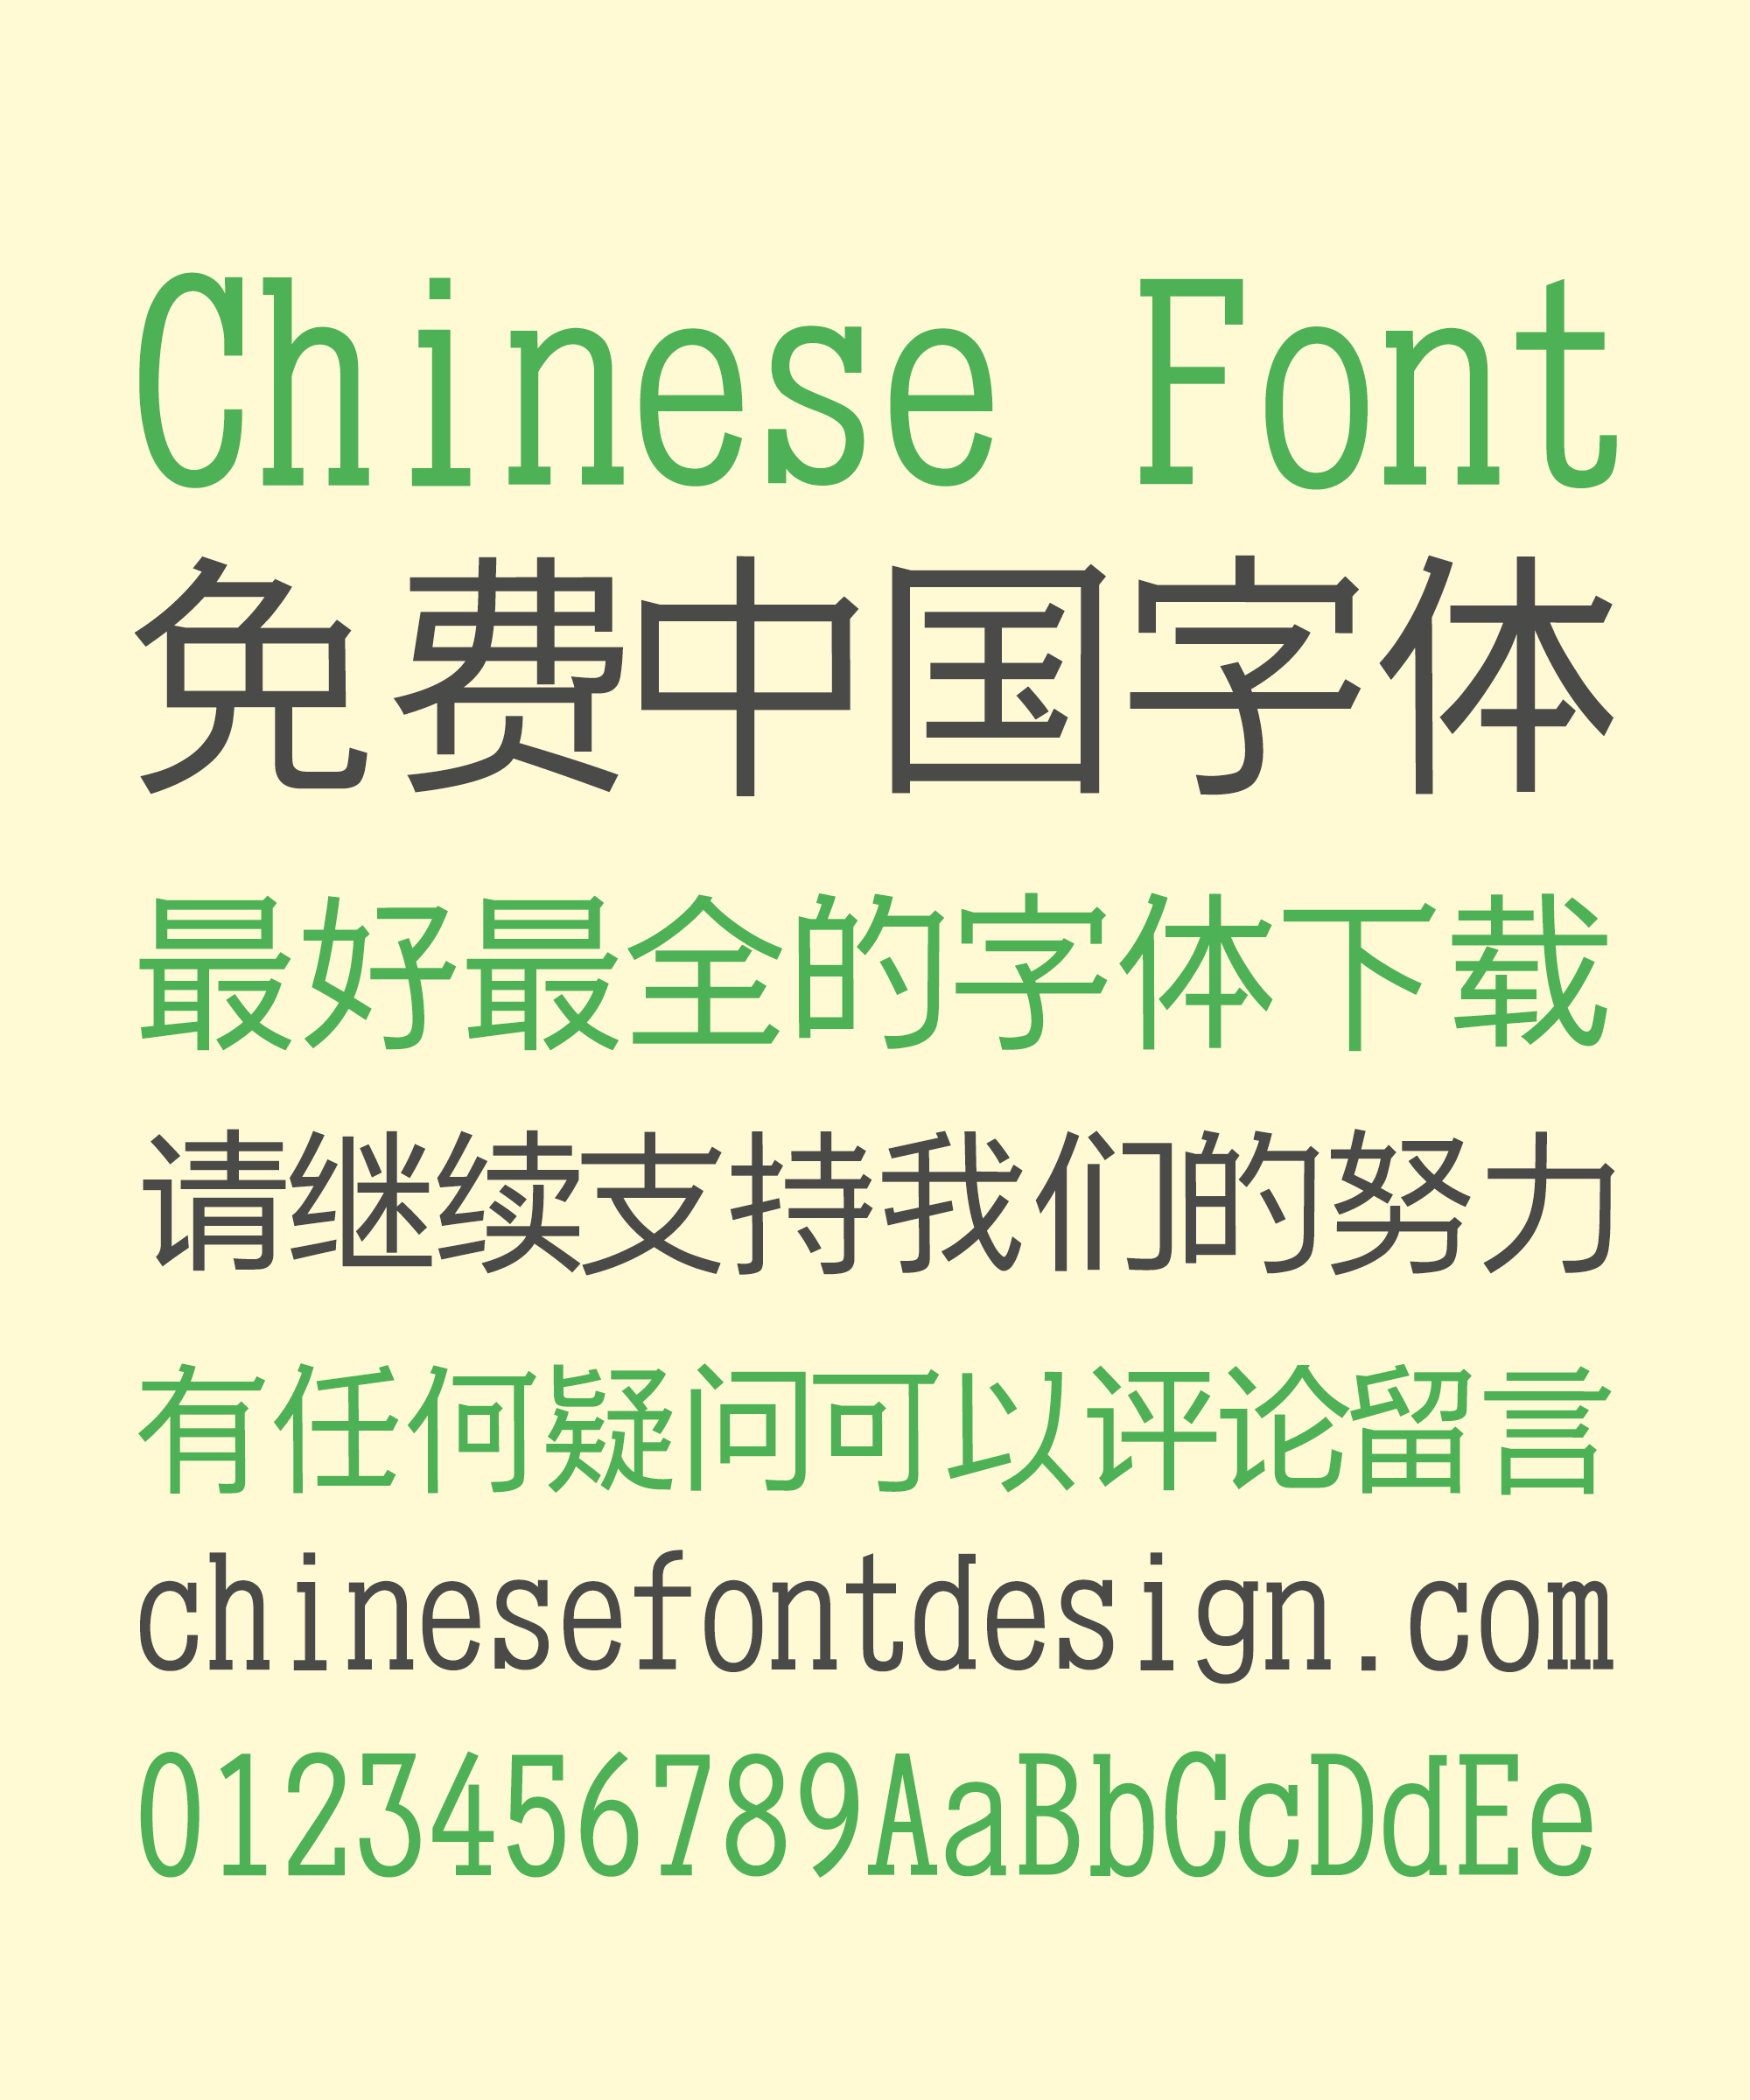 Mint Bold Chinese Font -Simplified Chinese Fonts